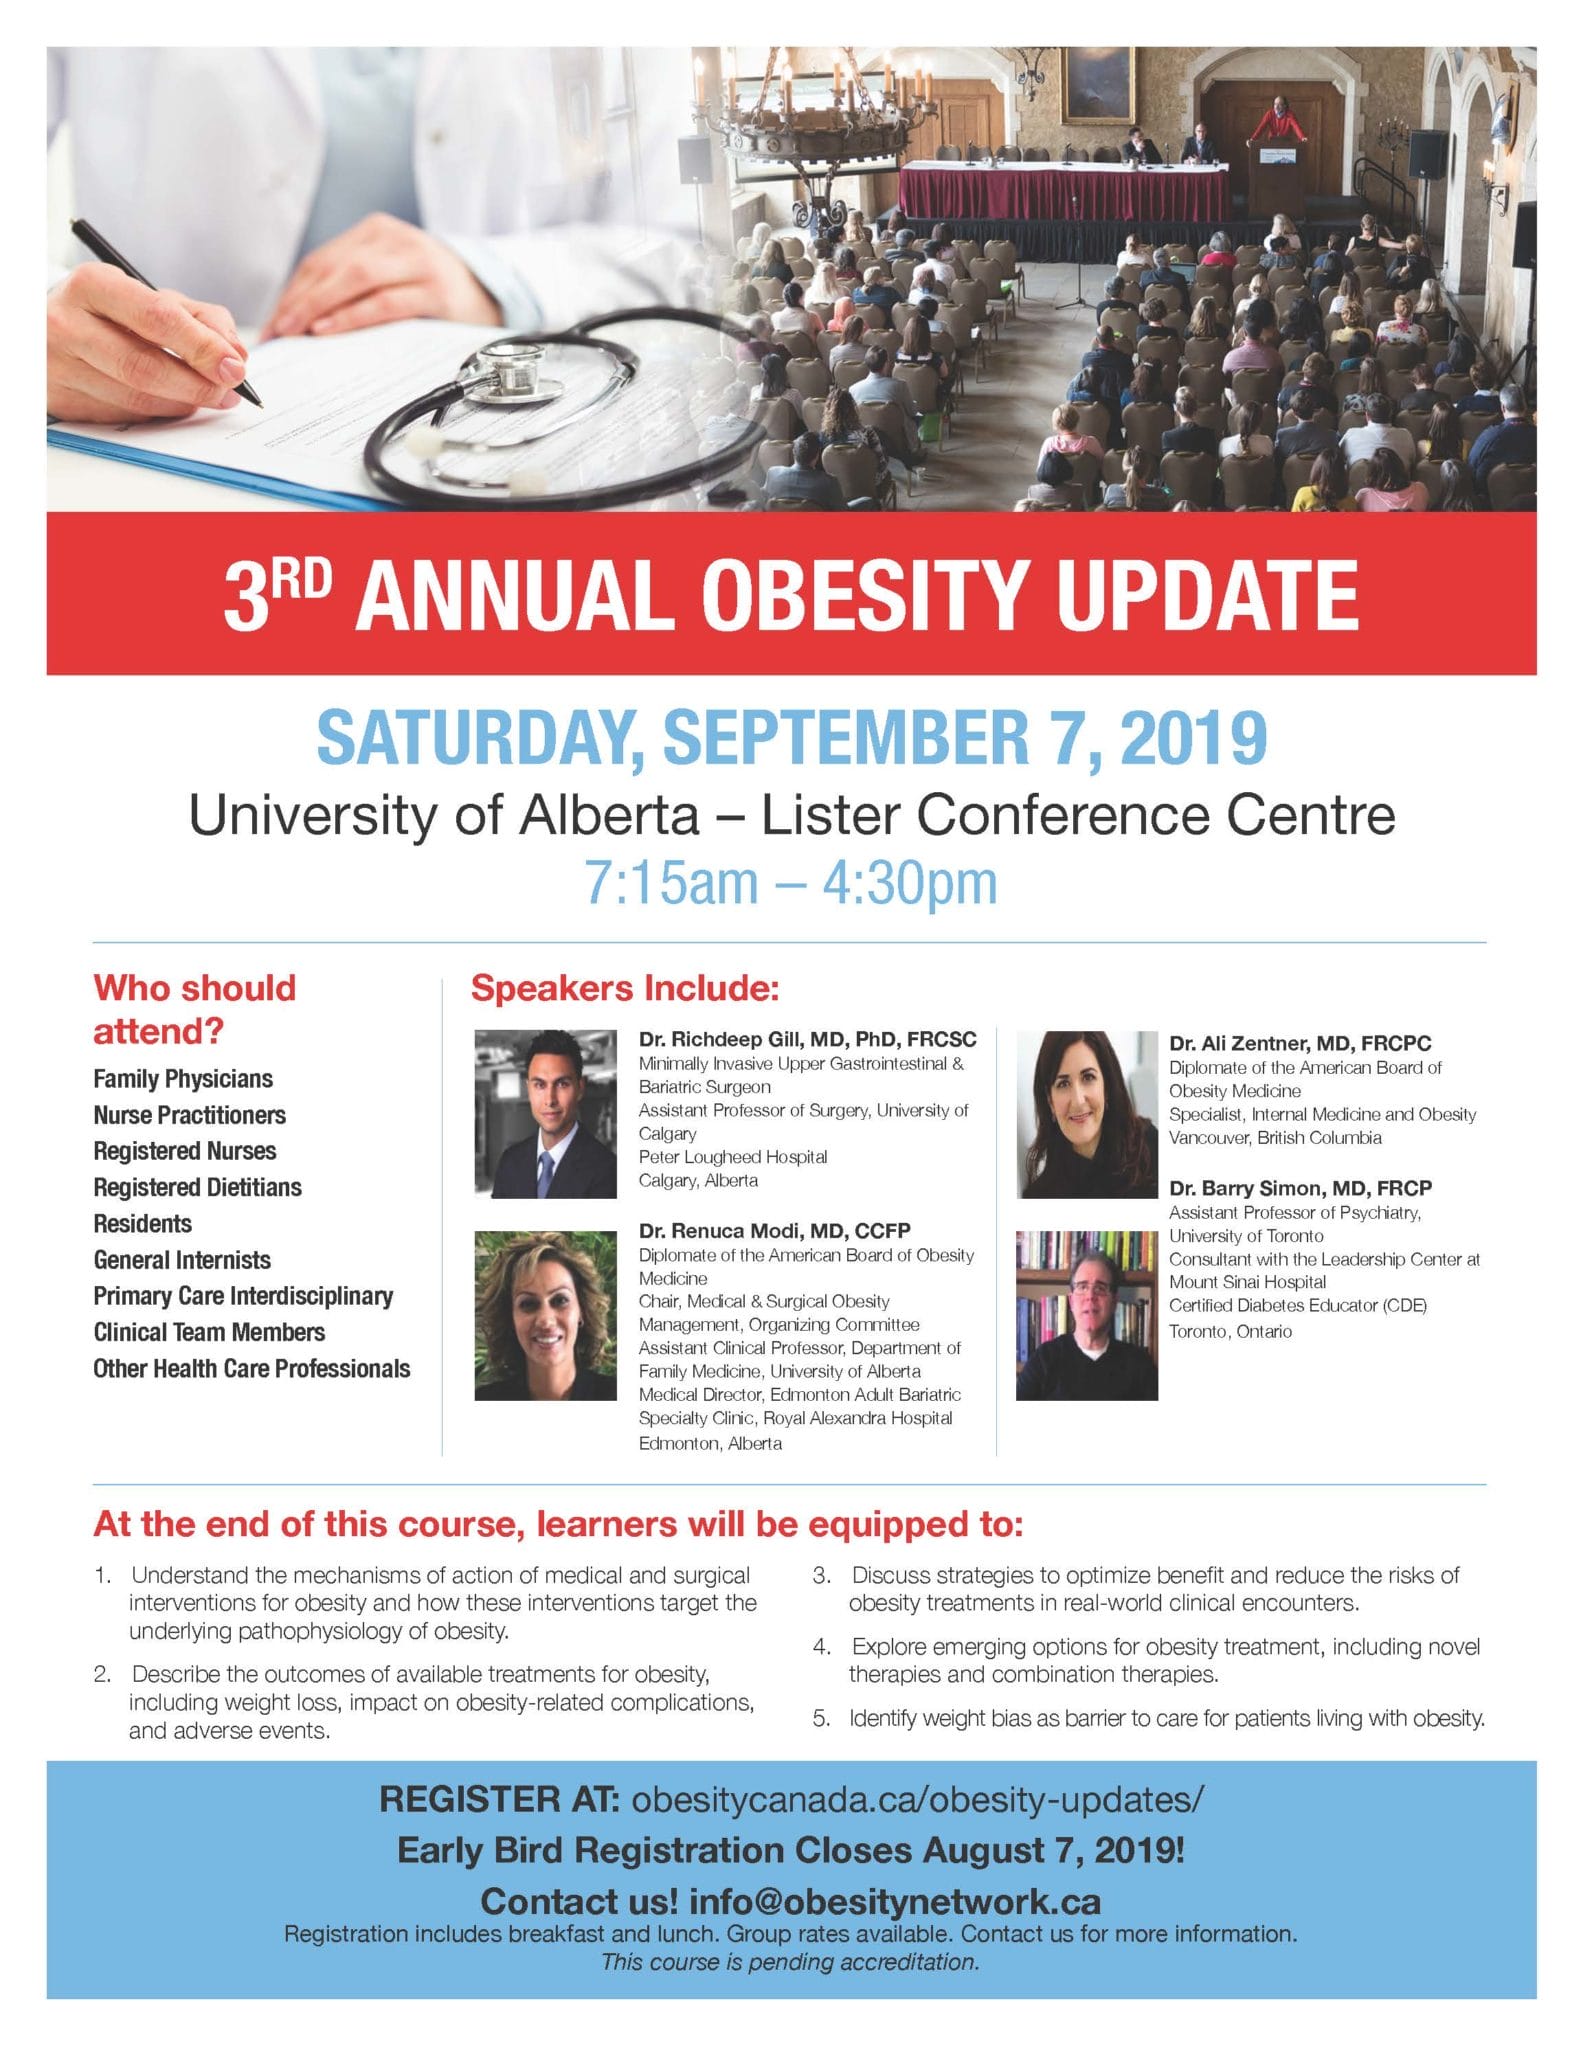 Promotional poster for the 3rd annual obesity update at the university of alberta on september 7, 2019, detailing event schedule, speakers, and registration information.